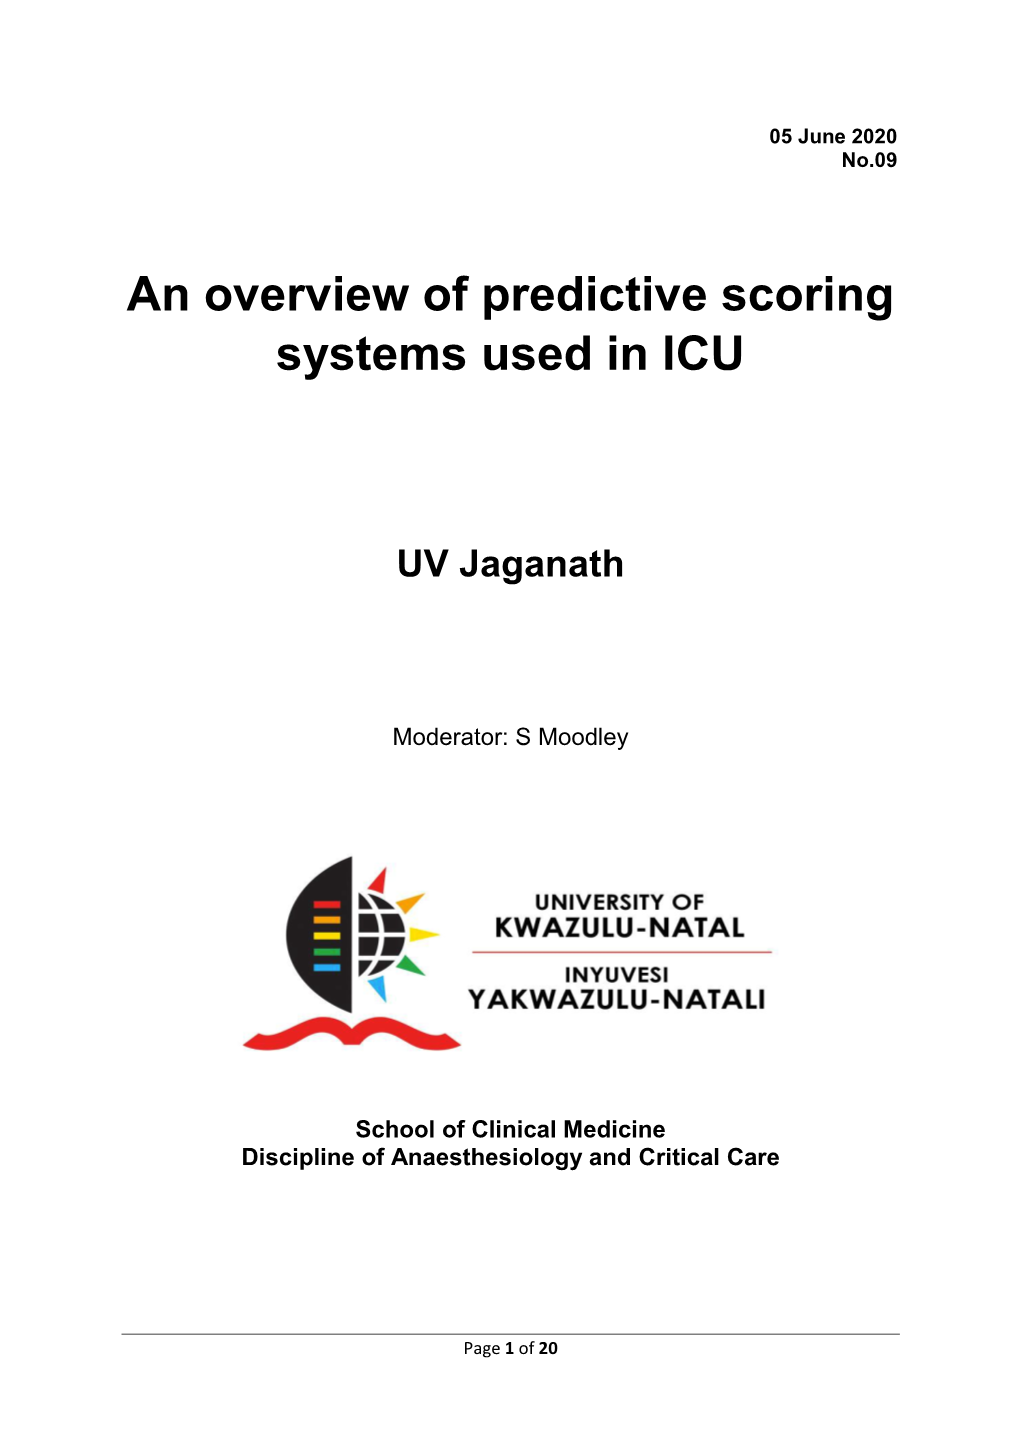 An Overview of Predictive Scoring Systems Used in ICU